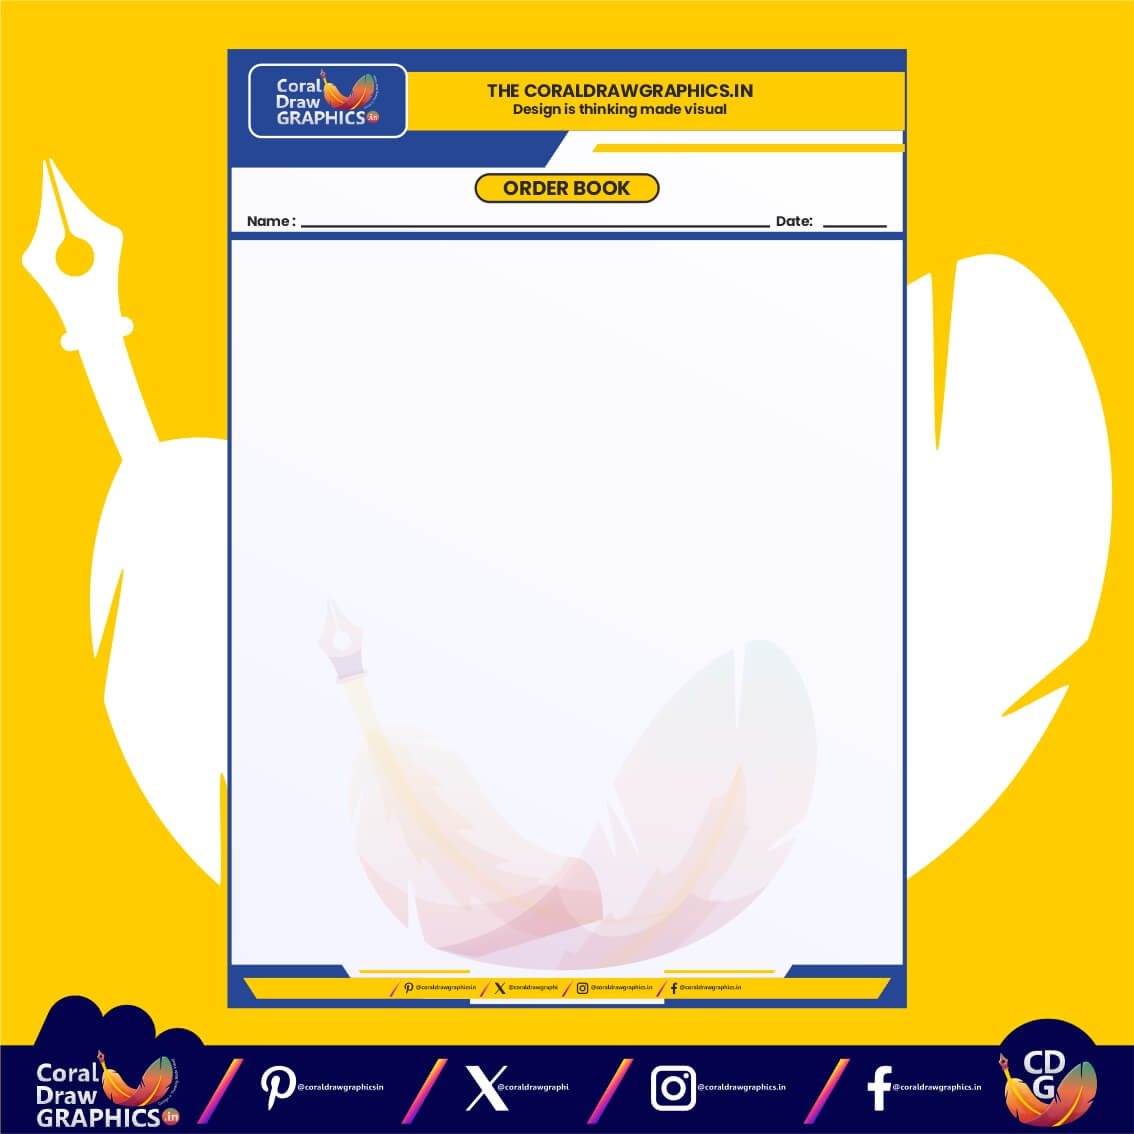 Letterhead for Company Documents for Order, Assigment etc